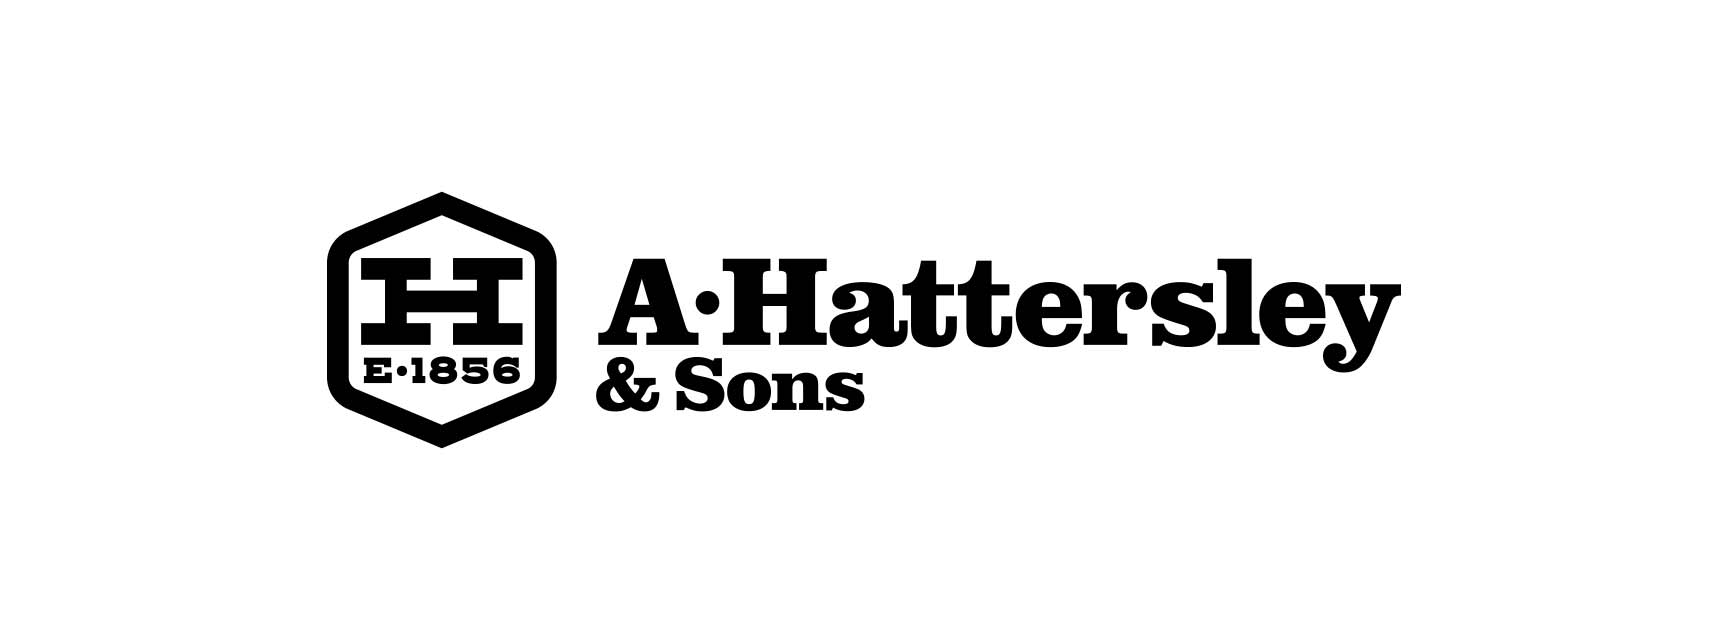 Final draft of A. Hattersly & Sons logo